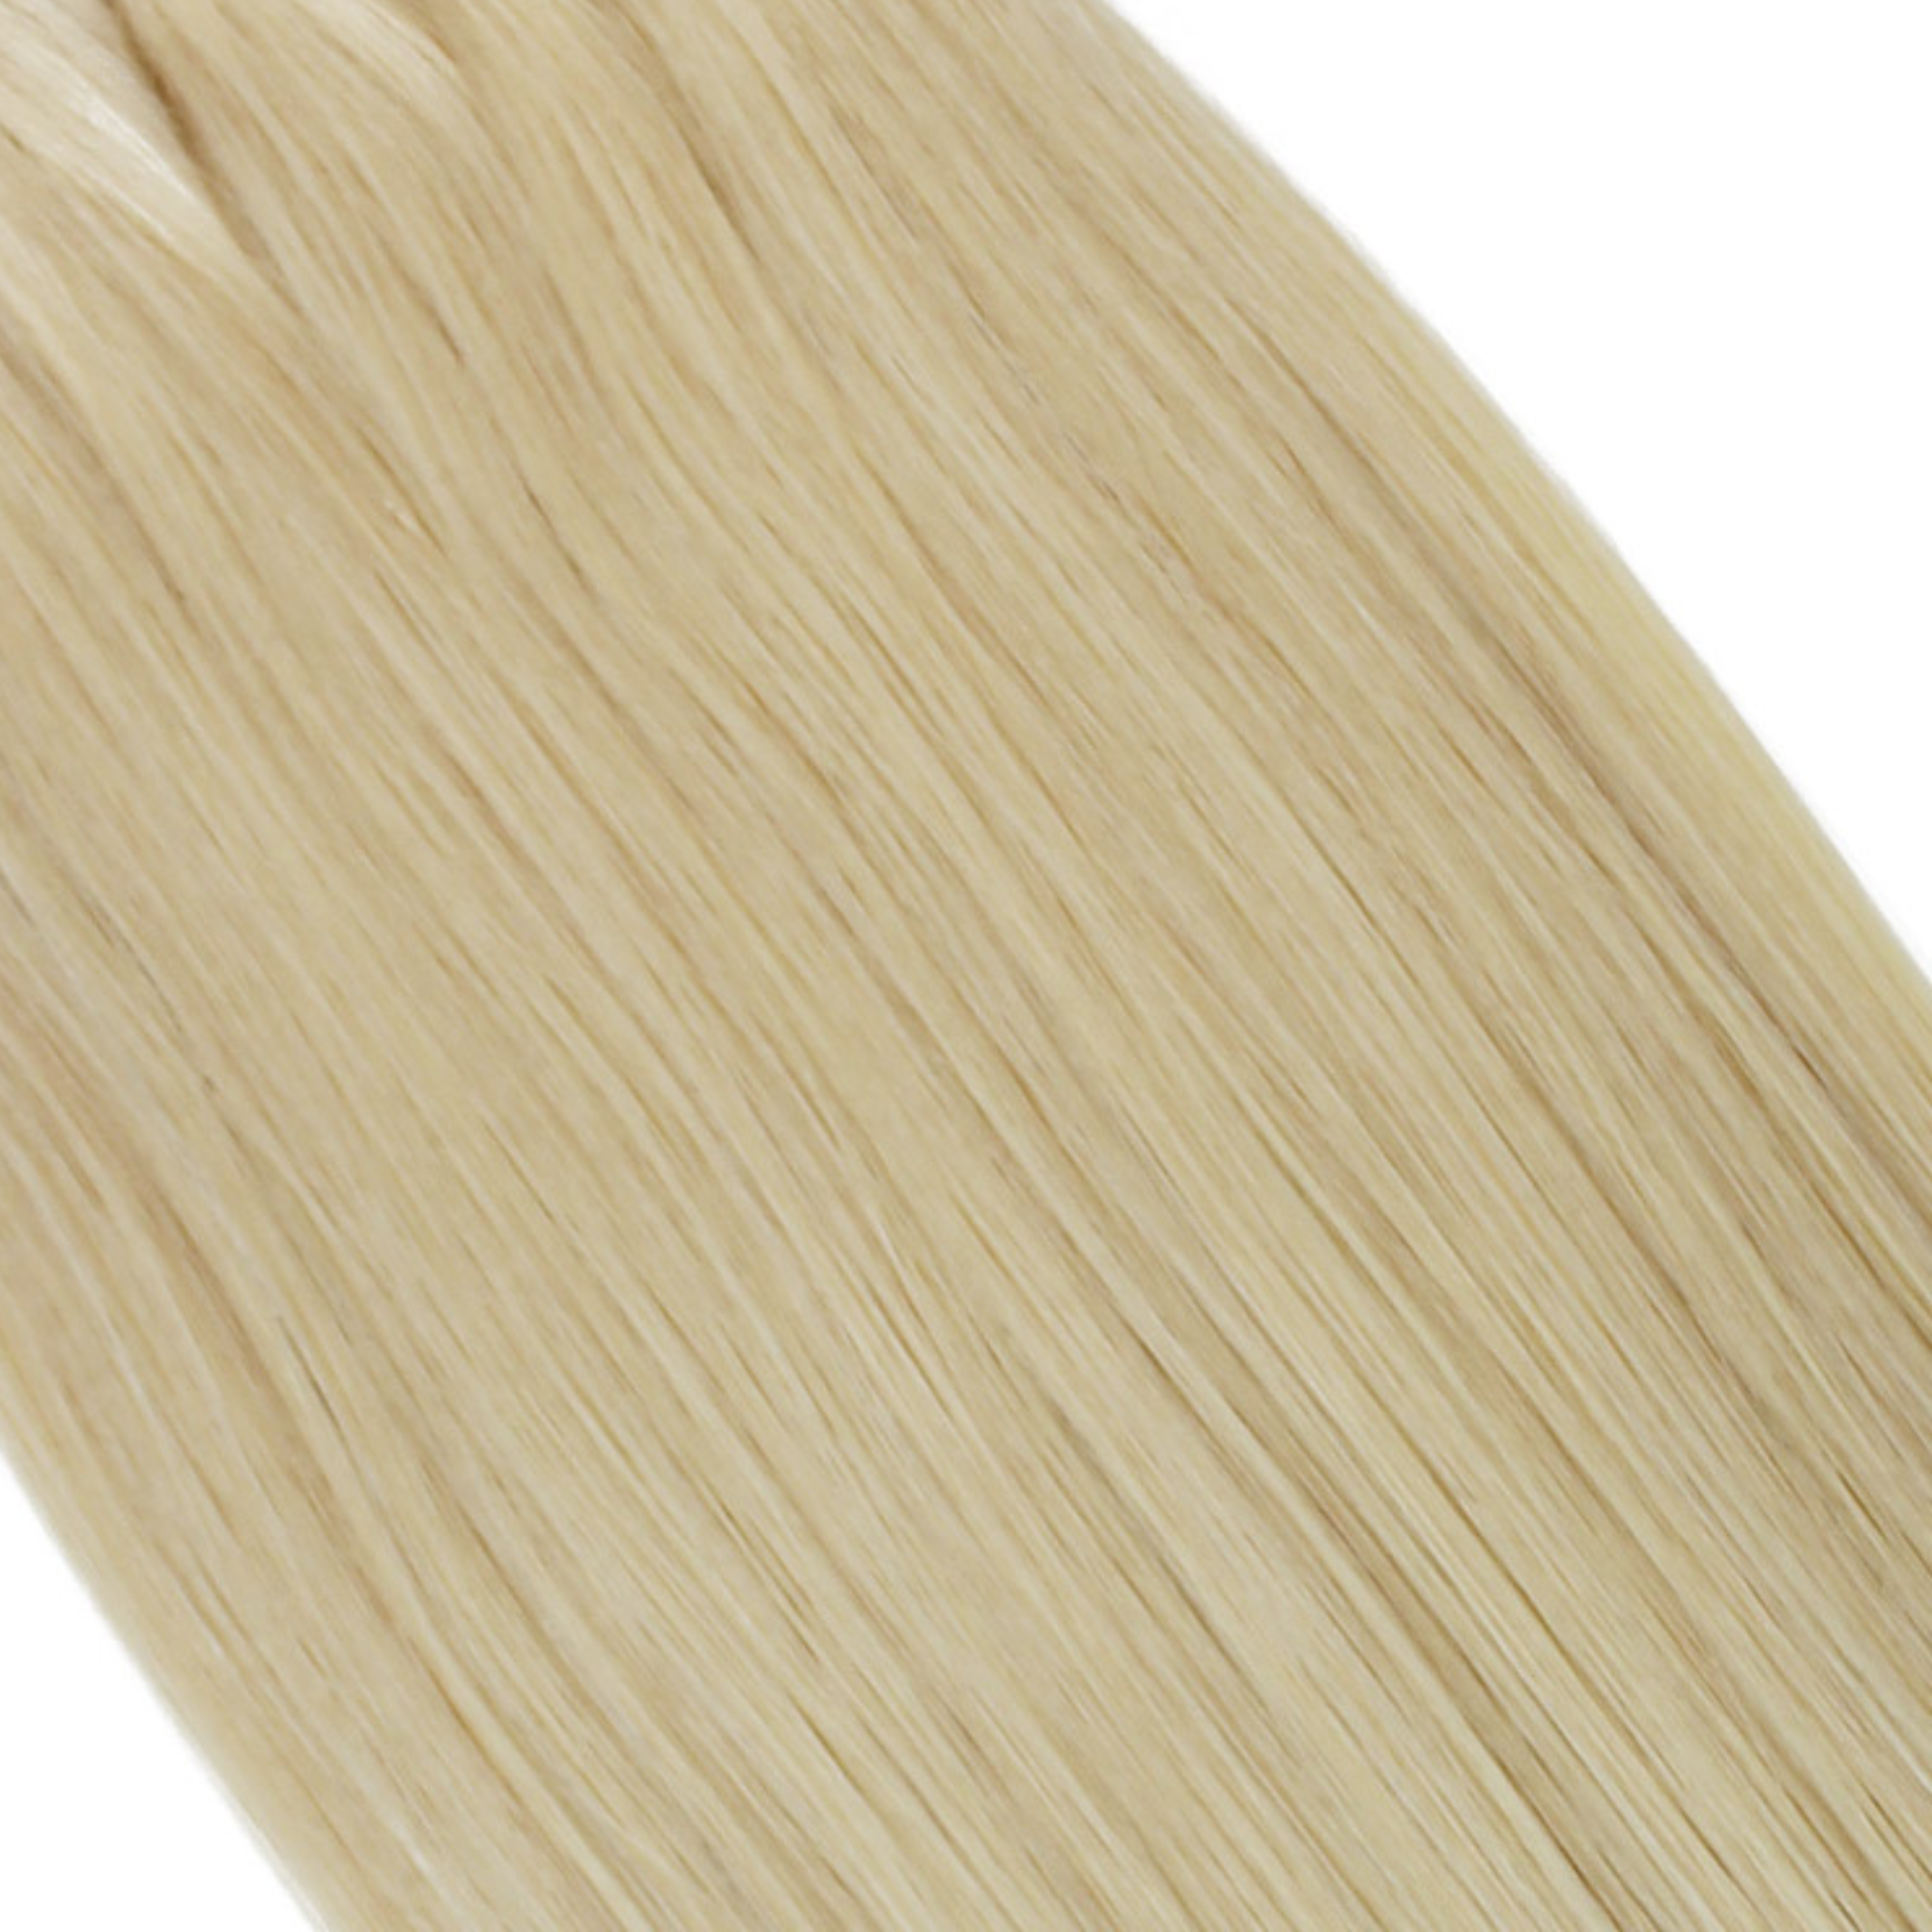 "hair rehab london 22" tape hair extensions shade swatch titled platinum"